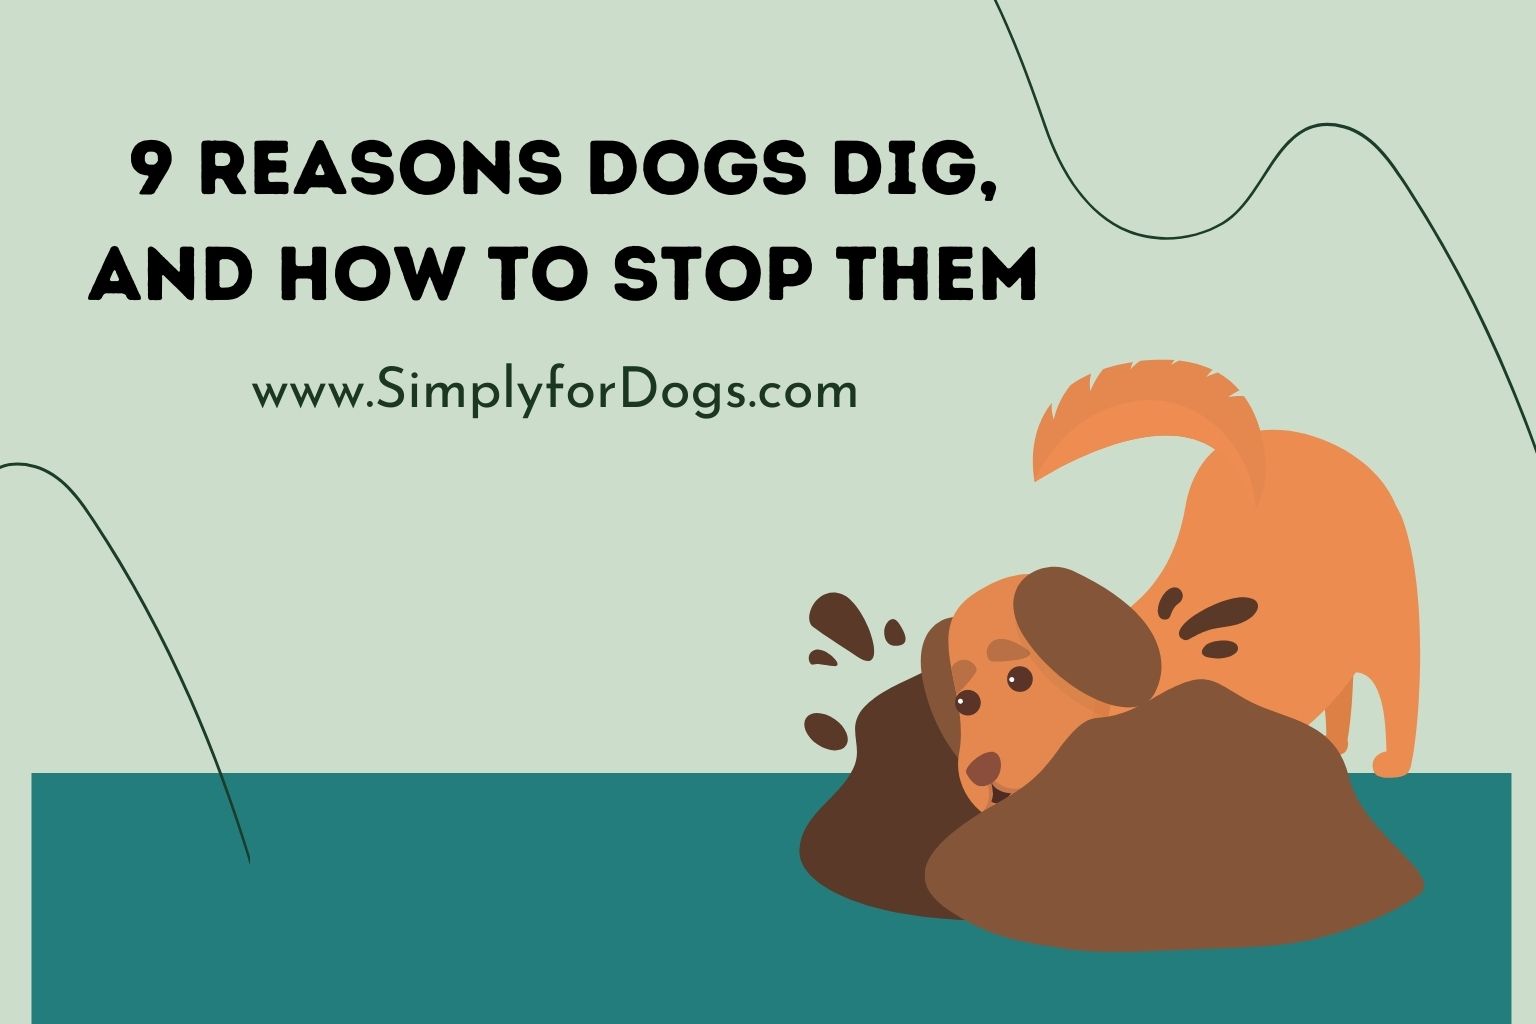 9 Reasons Dogs Dig, and How to Stop Them